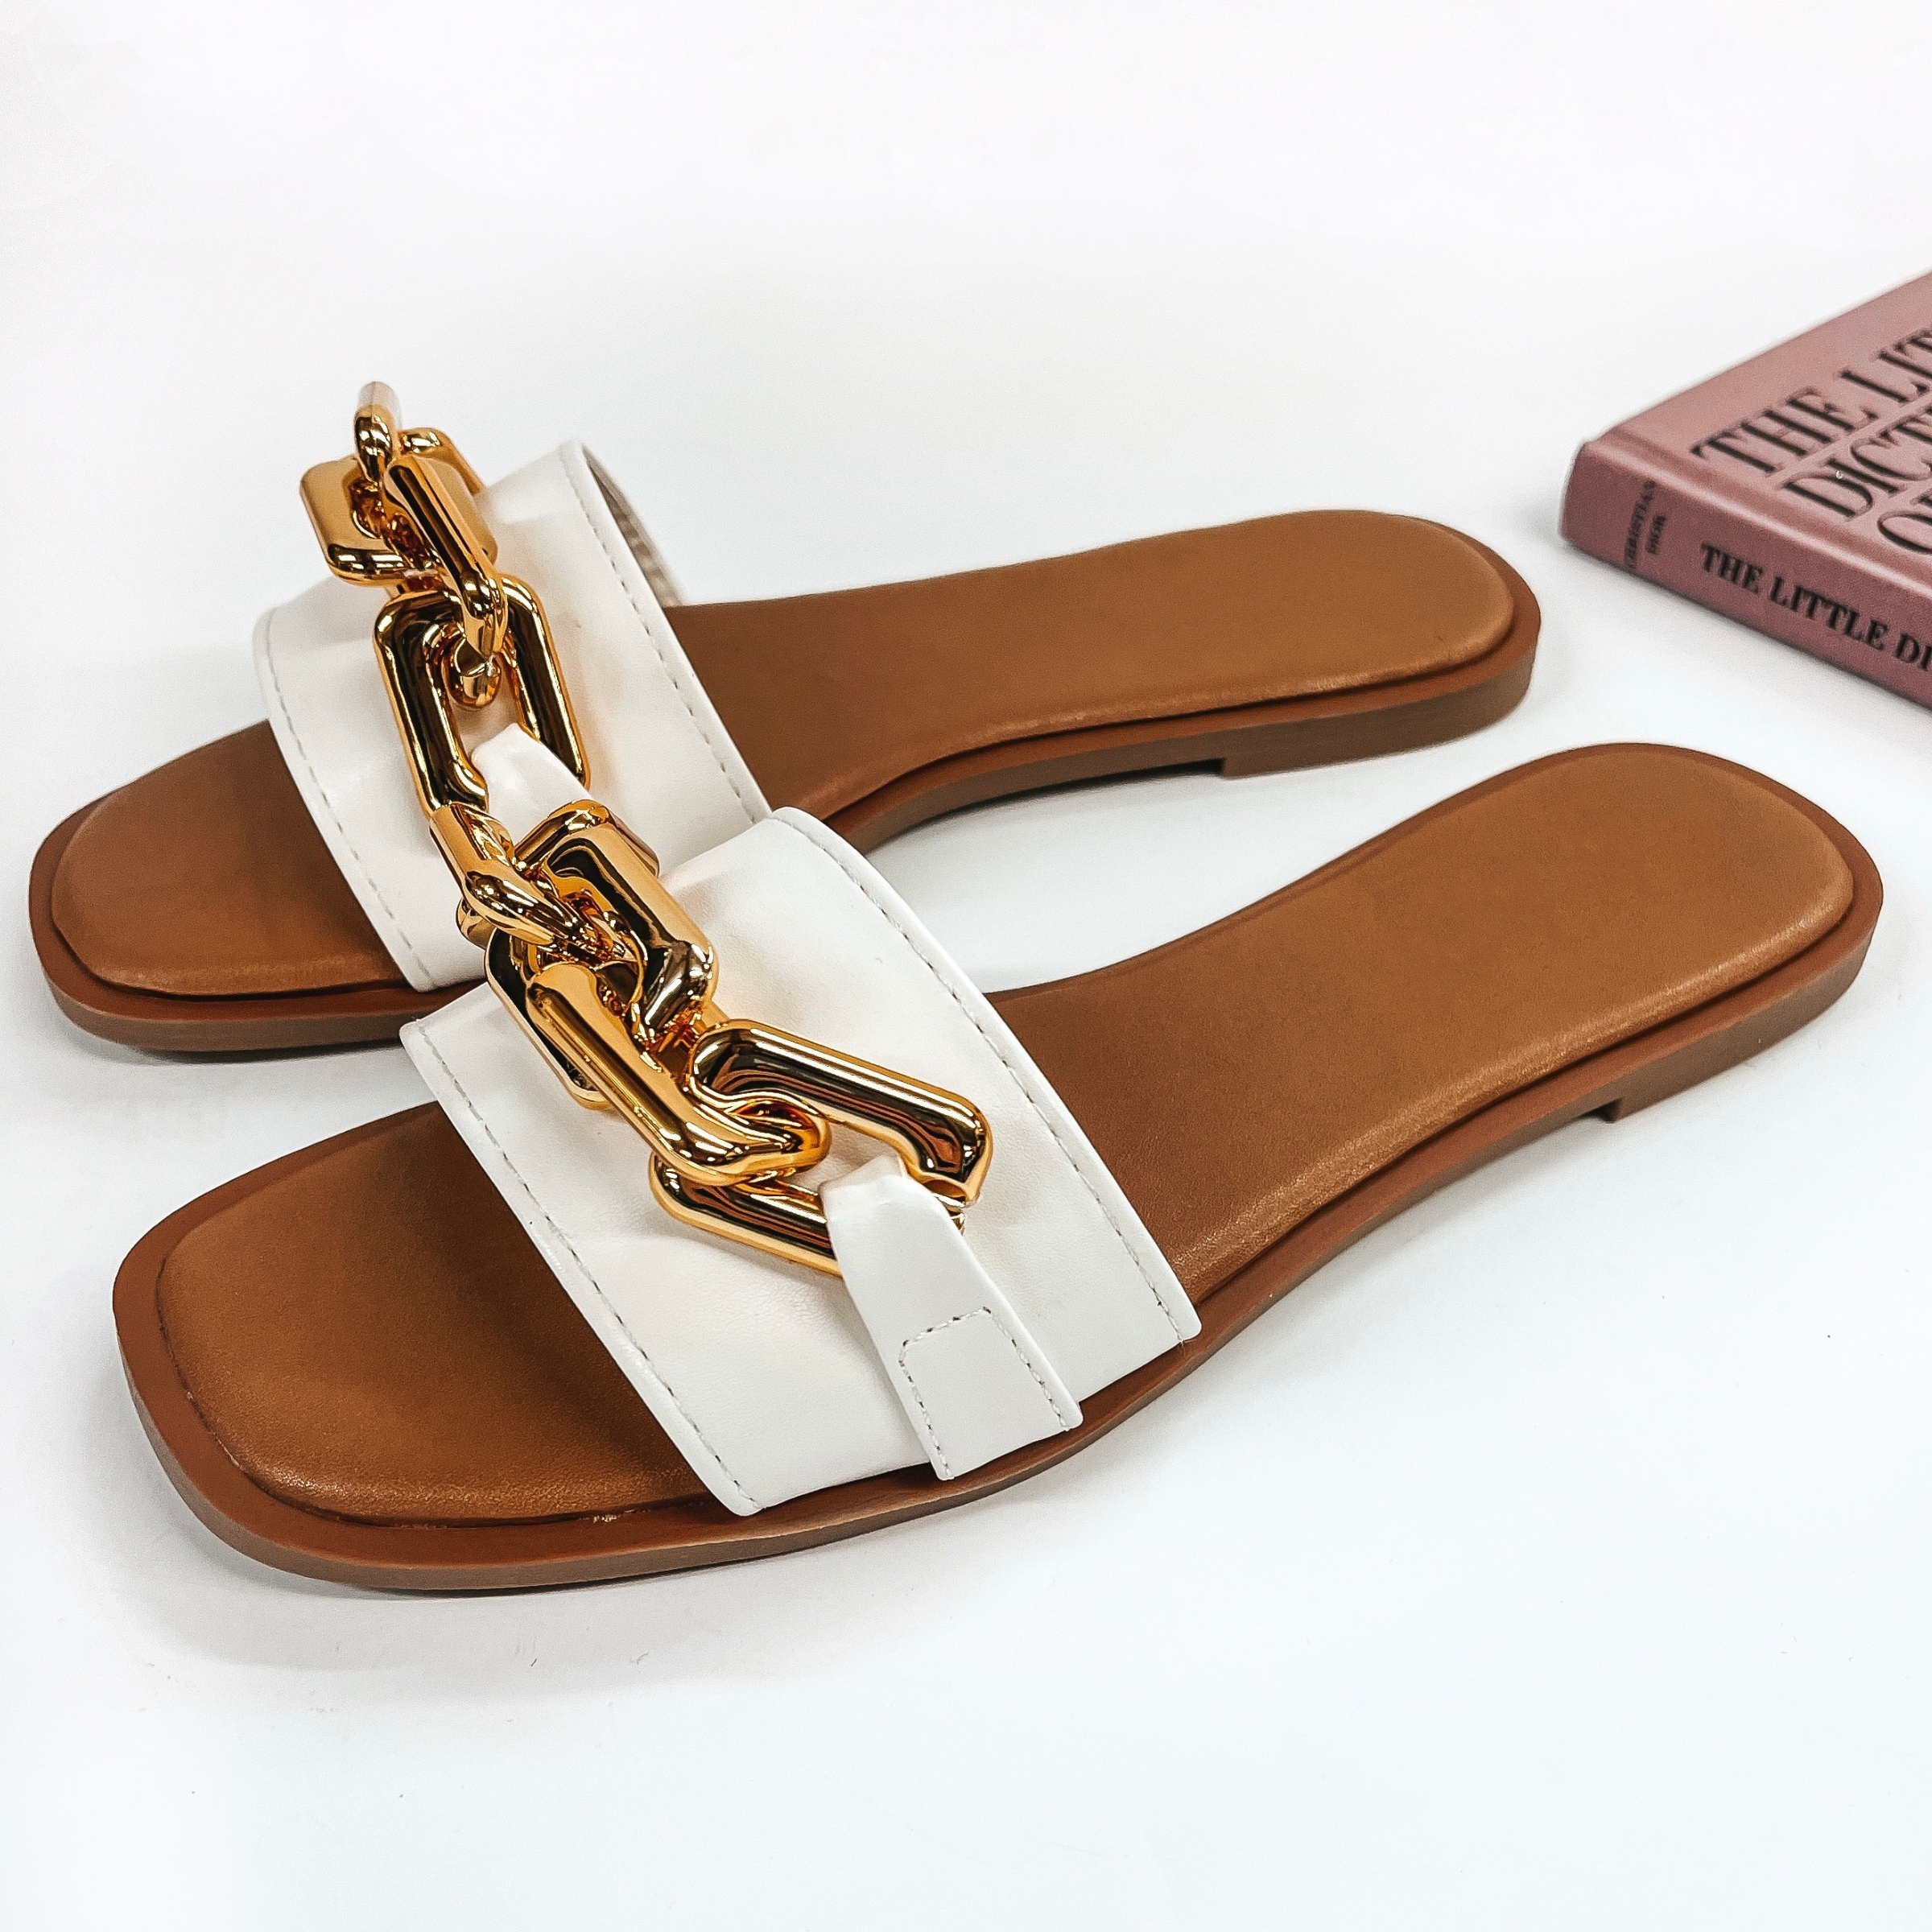 A pair of slide on flat sandals that have a white strap with a gold chain on top. Pictured on white background with fashion book.